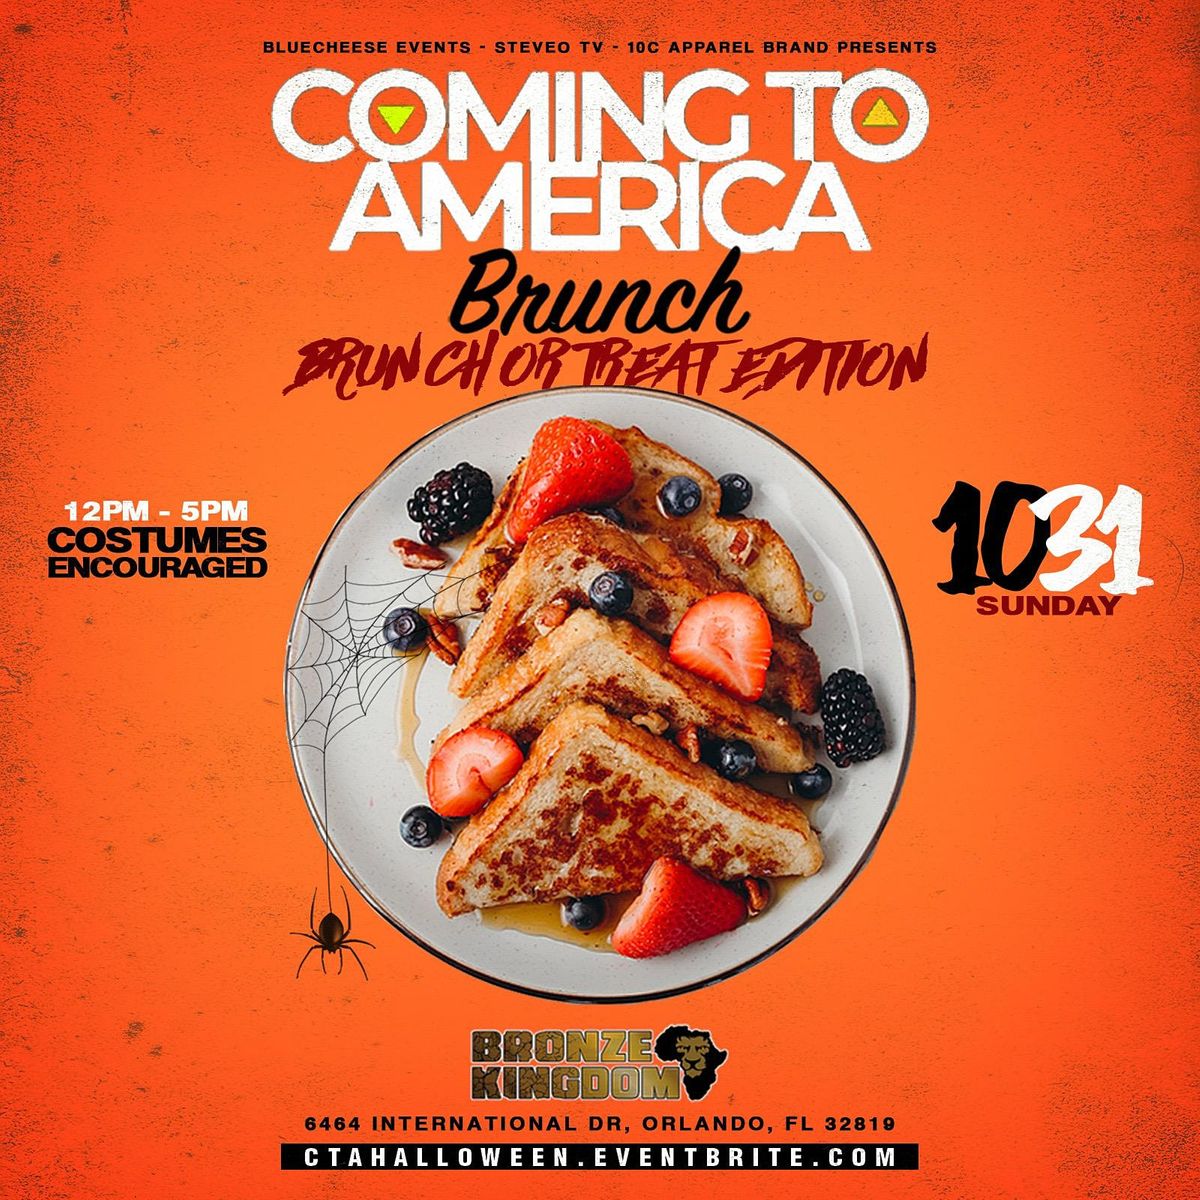 COMING TO AMERICA BRUNCH: "BRUNCH OR TREAT" EDITION